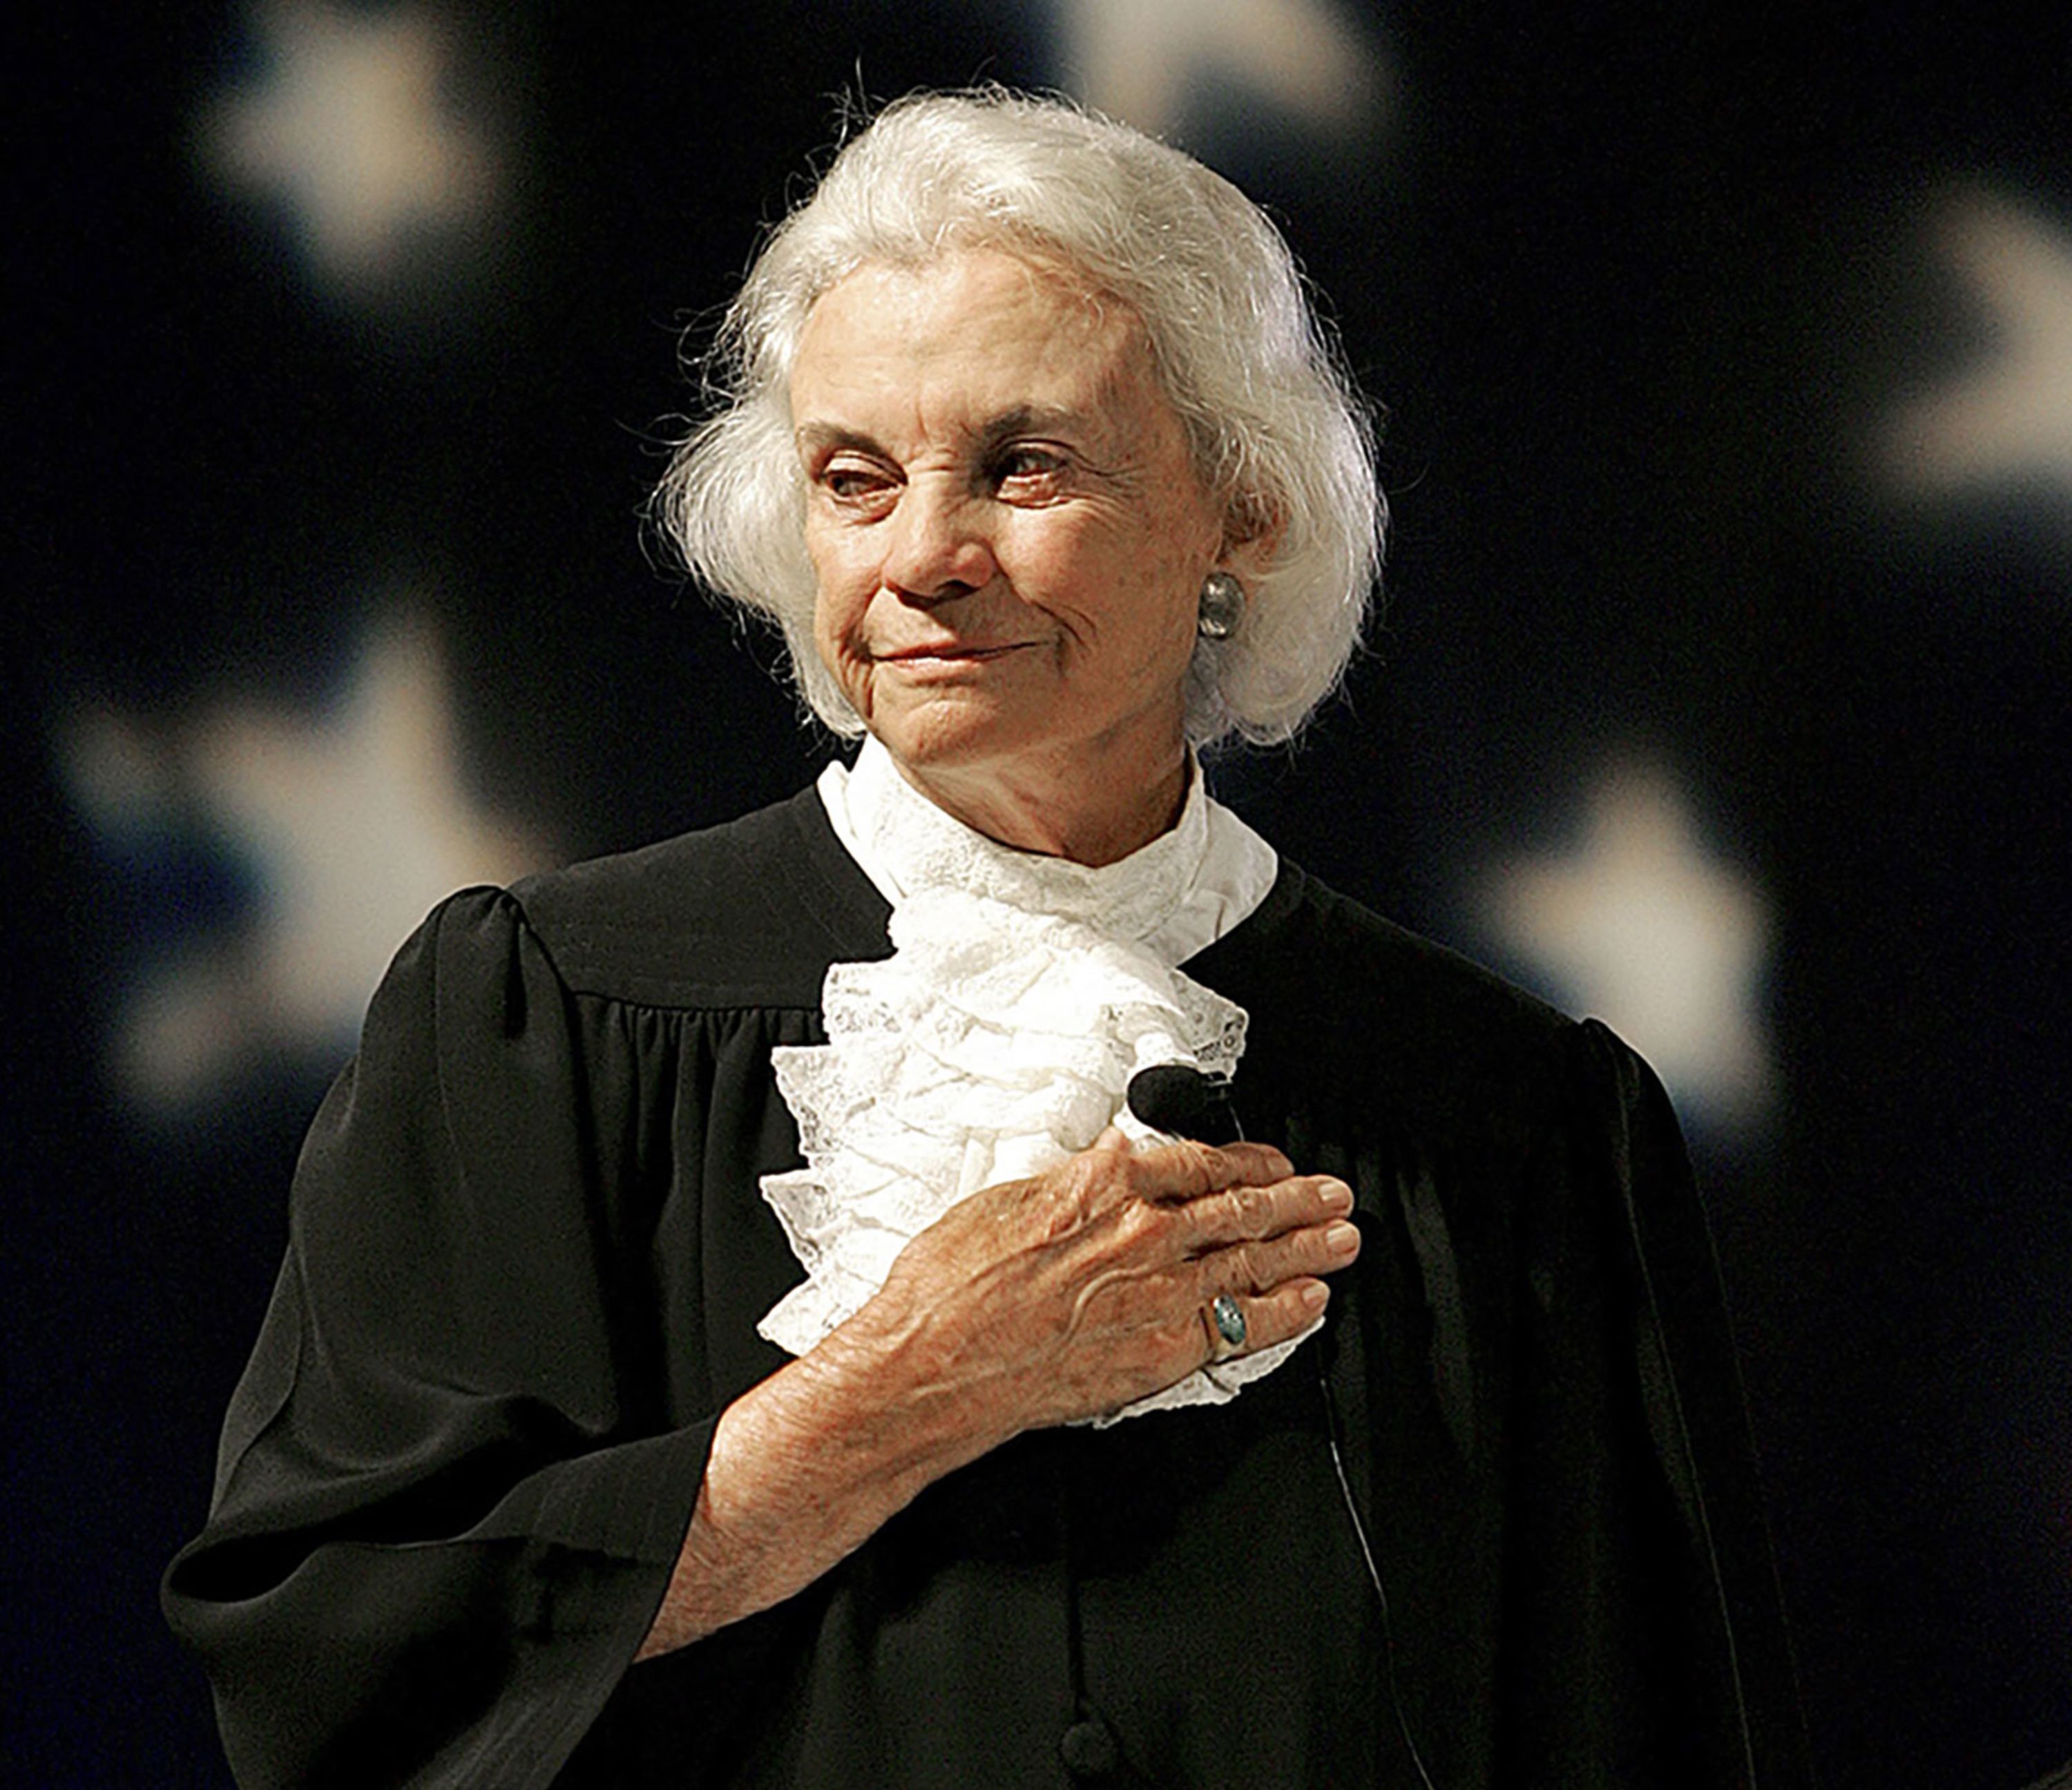 Sandra Day O'Connor does the pledge of allegiance while attending a citizenship hearing in Gilbert, Arizona, in 2005.